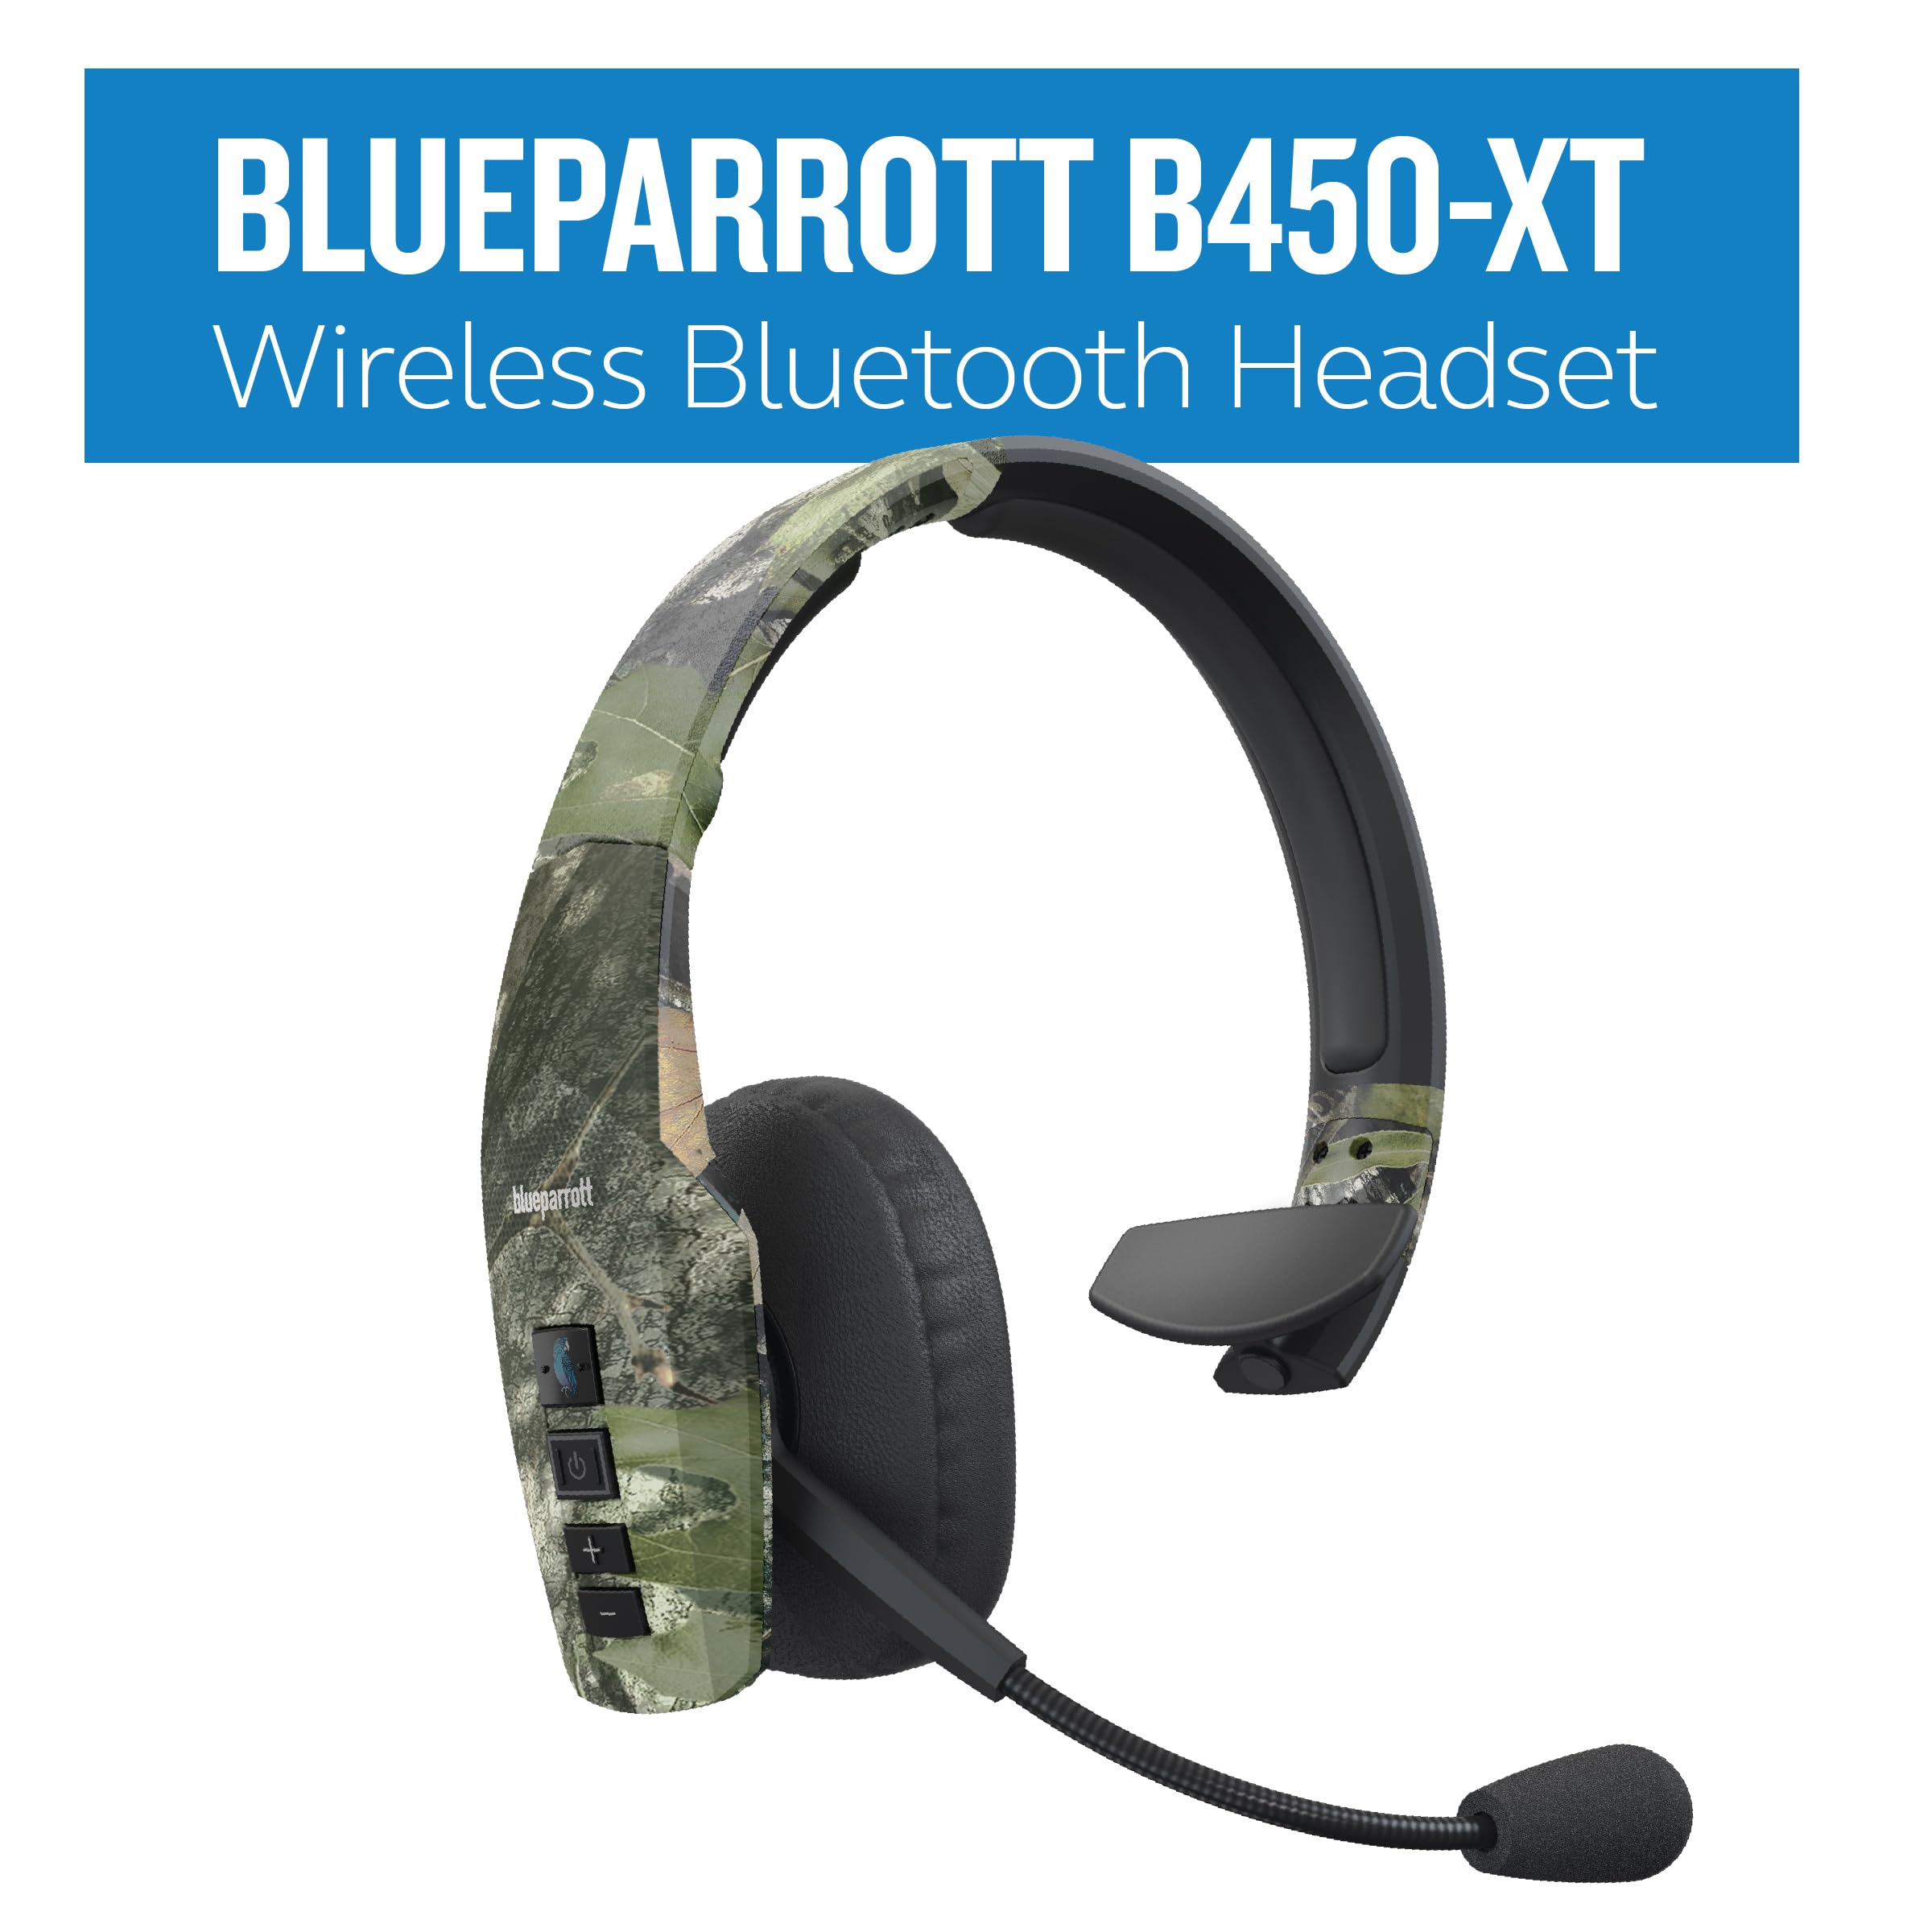 BlueParrott B450-XT Mossy Oak Obsession Edition - Noise Cancelling Bluetooth Wireless Headset – Updated Design with Industry Leading Sound & Improved Comfort, Up to 24 Hours of Talk Time, IP54-Rated